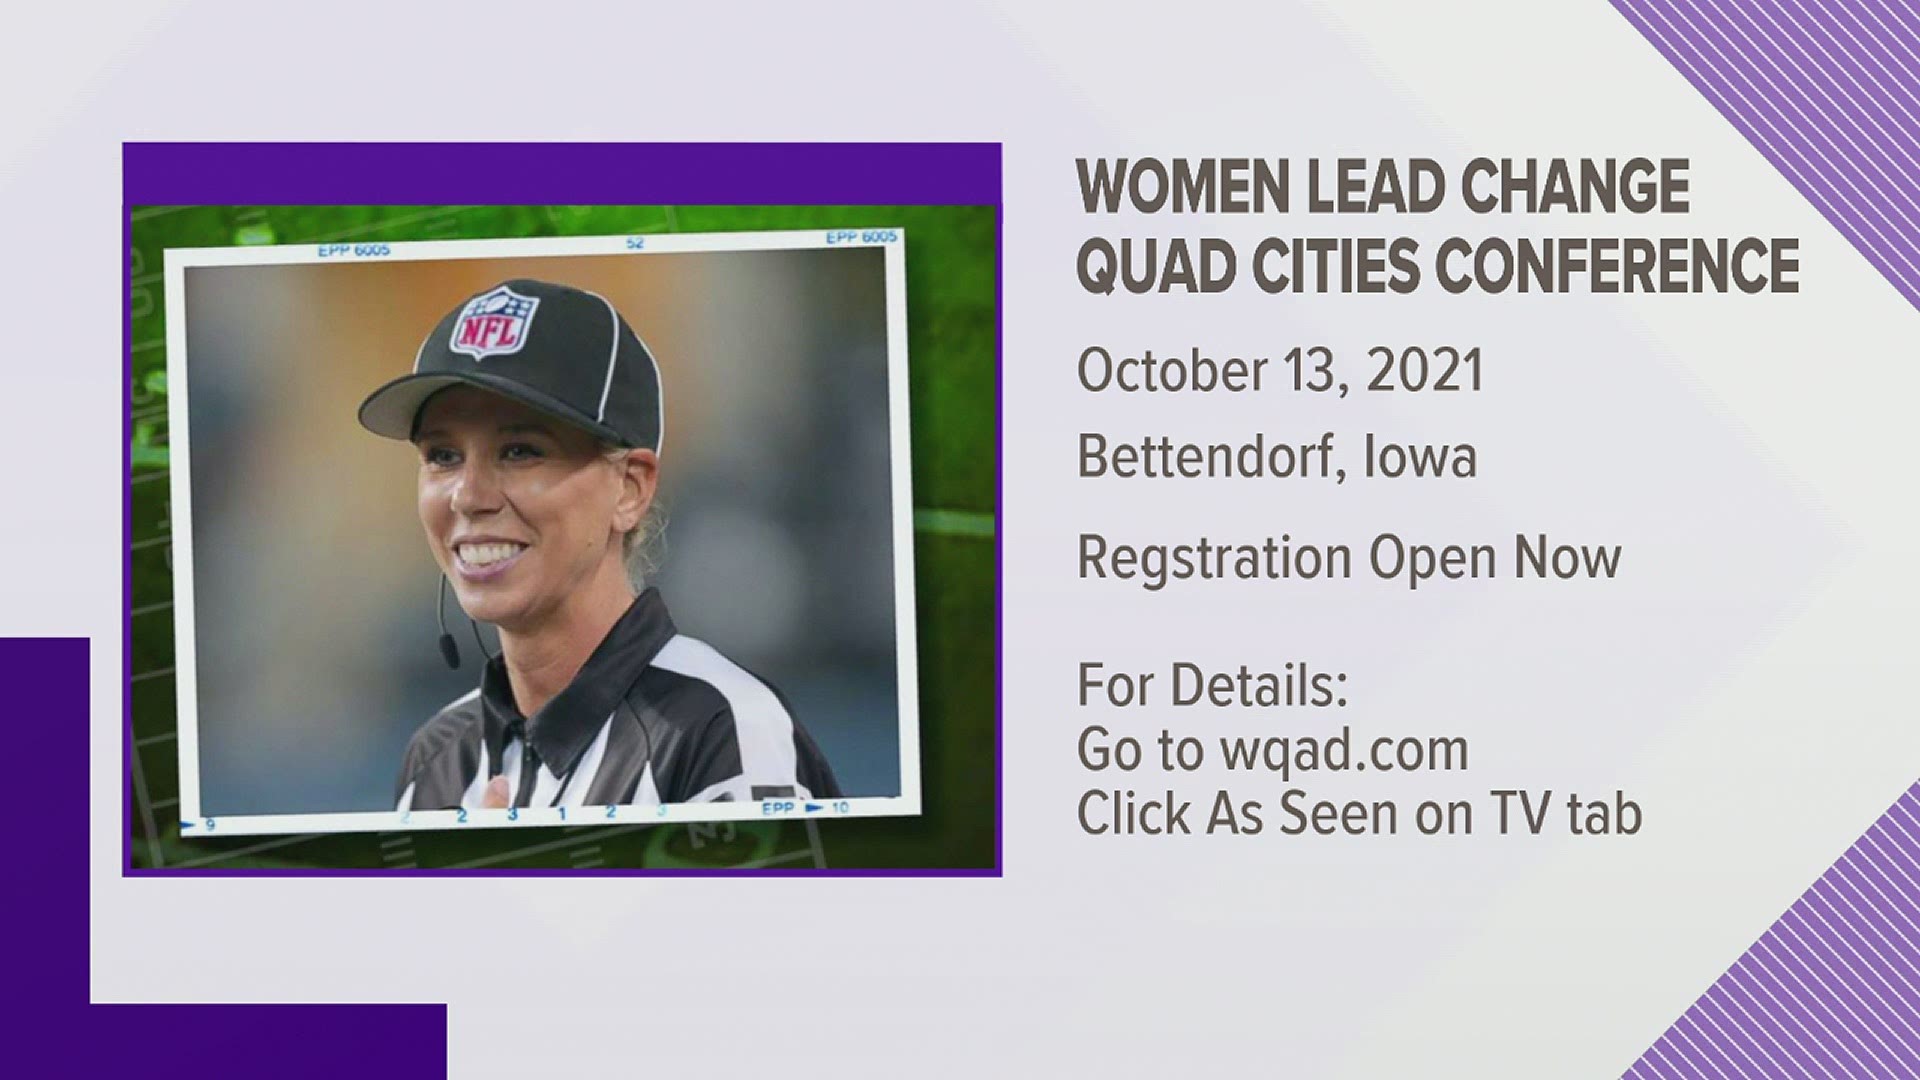 Sarah Thomas is scheduled to be at the Women Lead Change Quad Cities Conference on October 13, 2021.